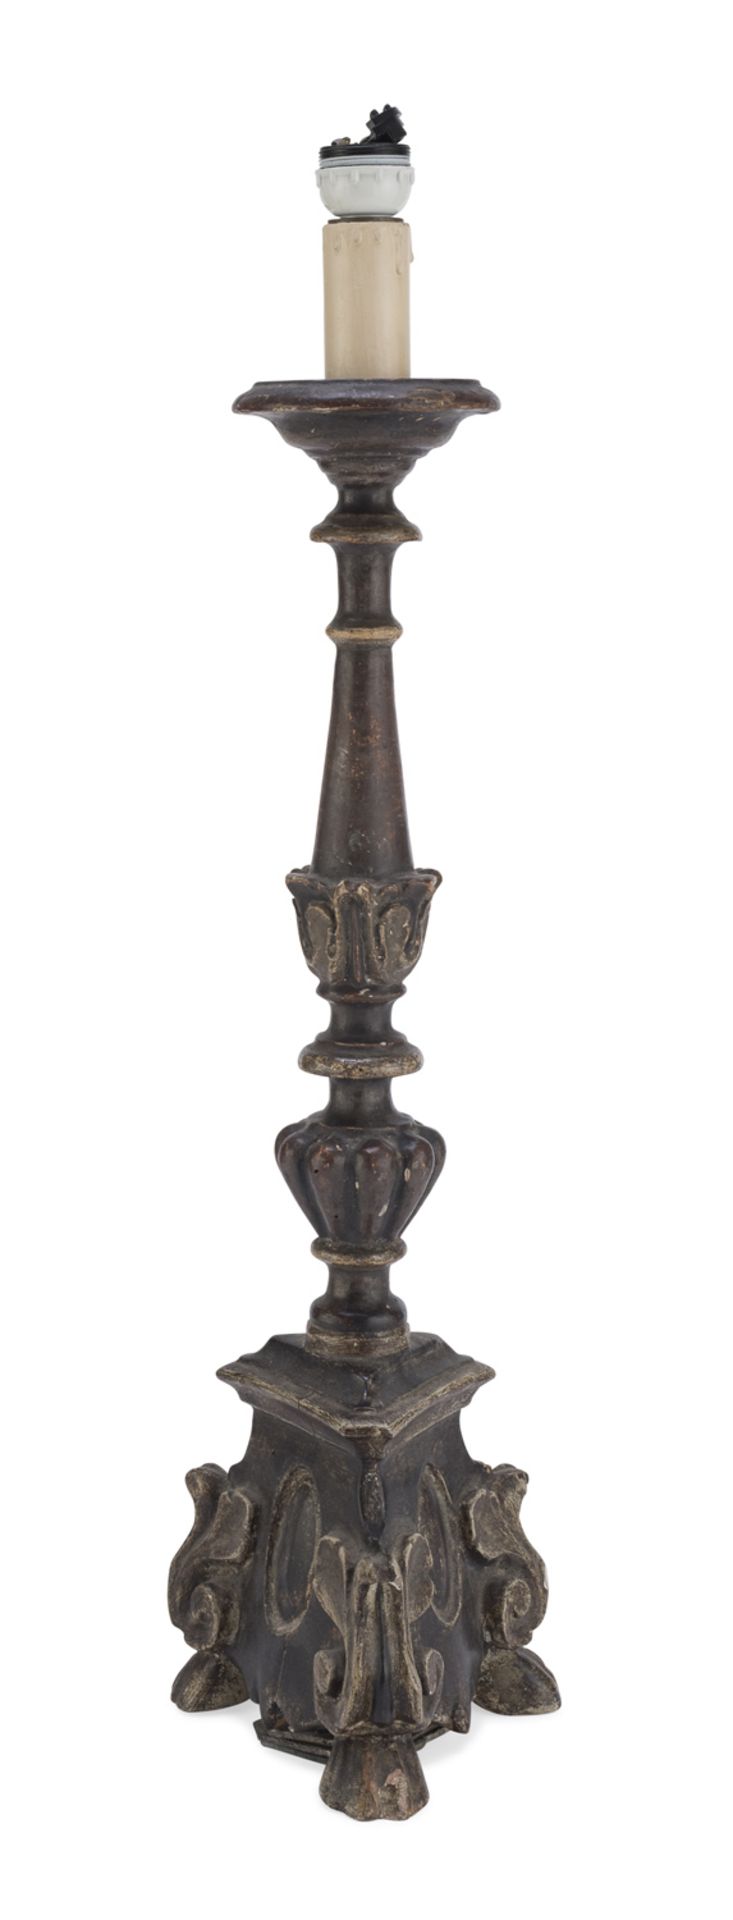 CANDLESTICK IN LACQUERED WOOD 18TH CENTURY